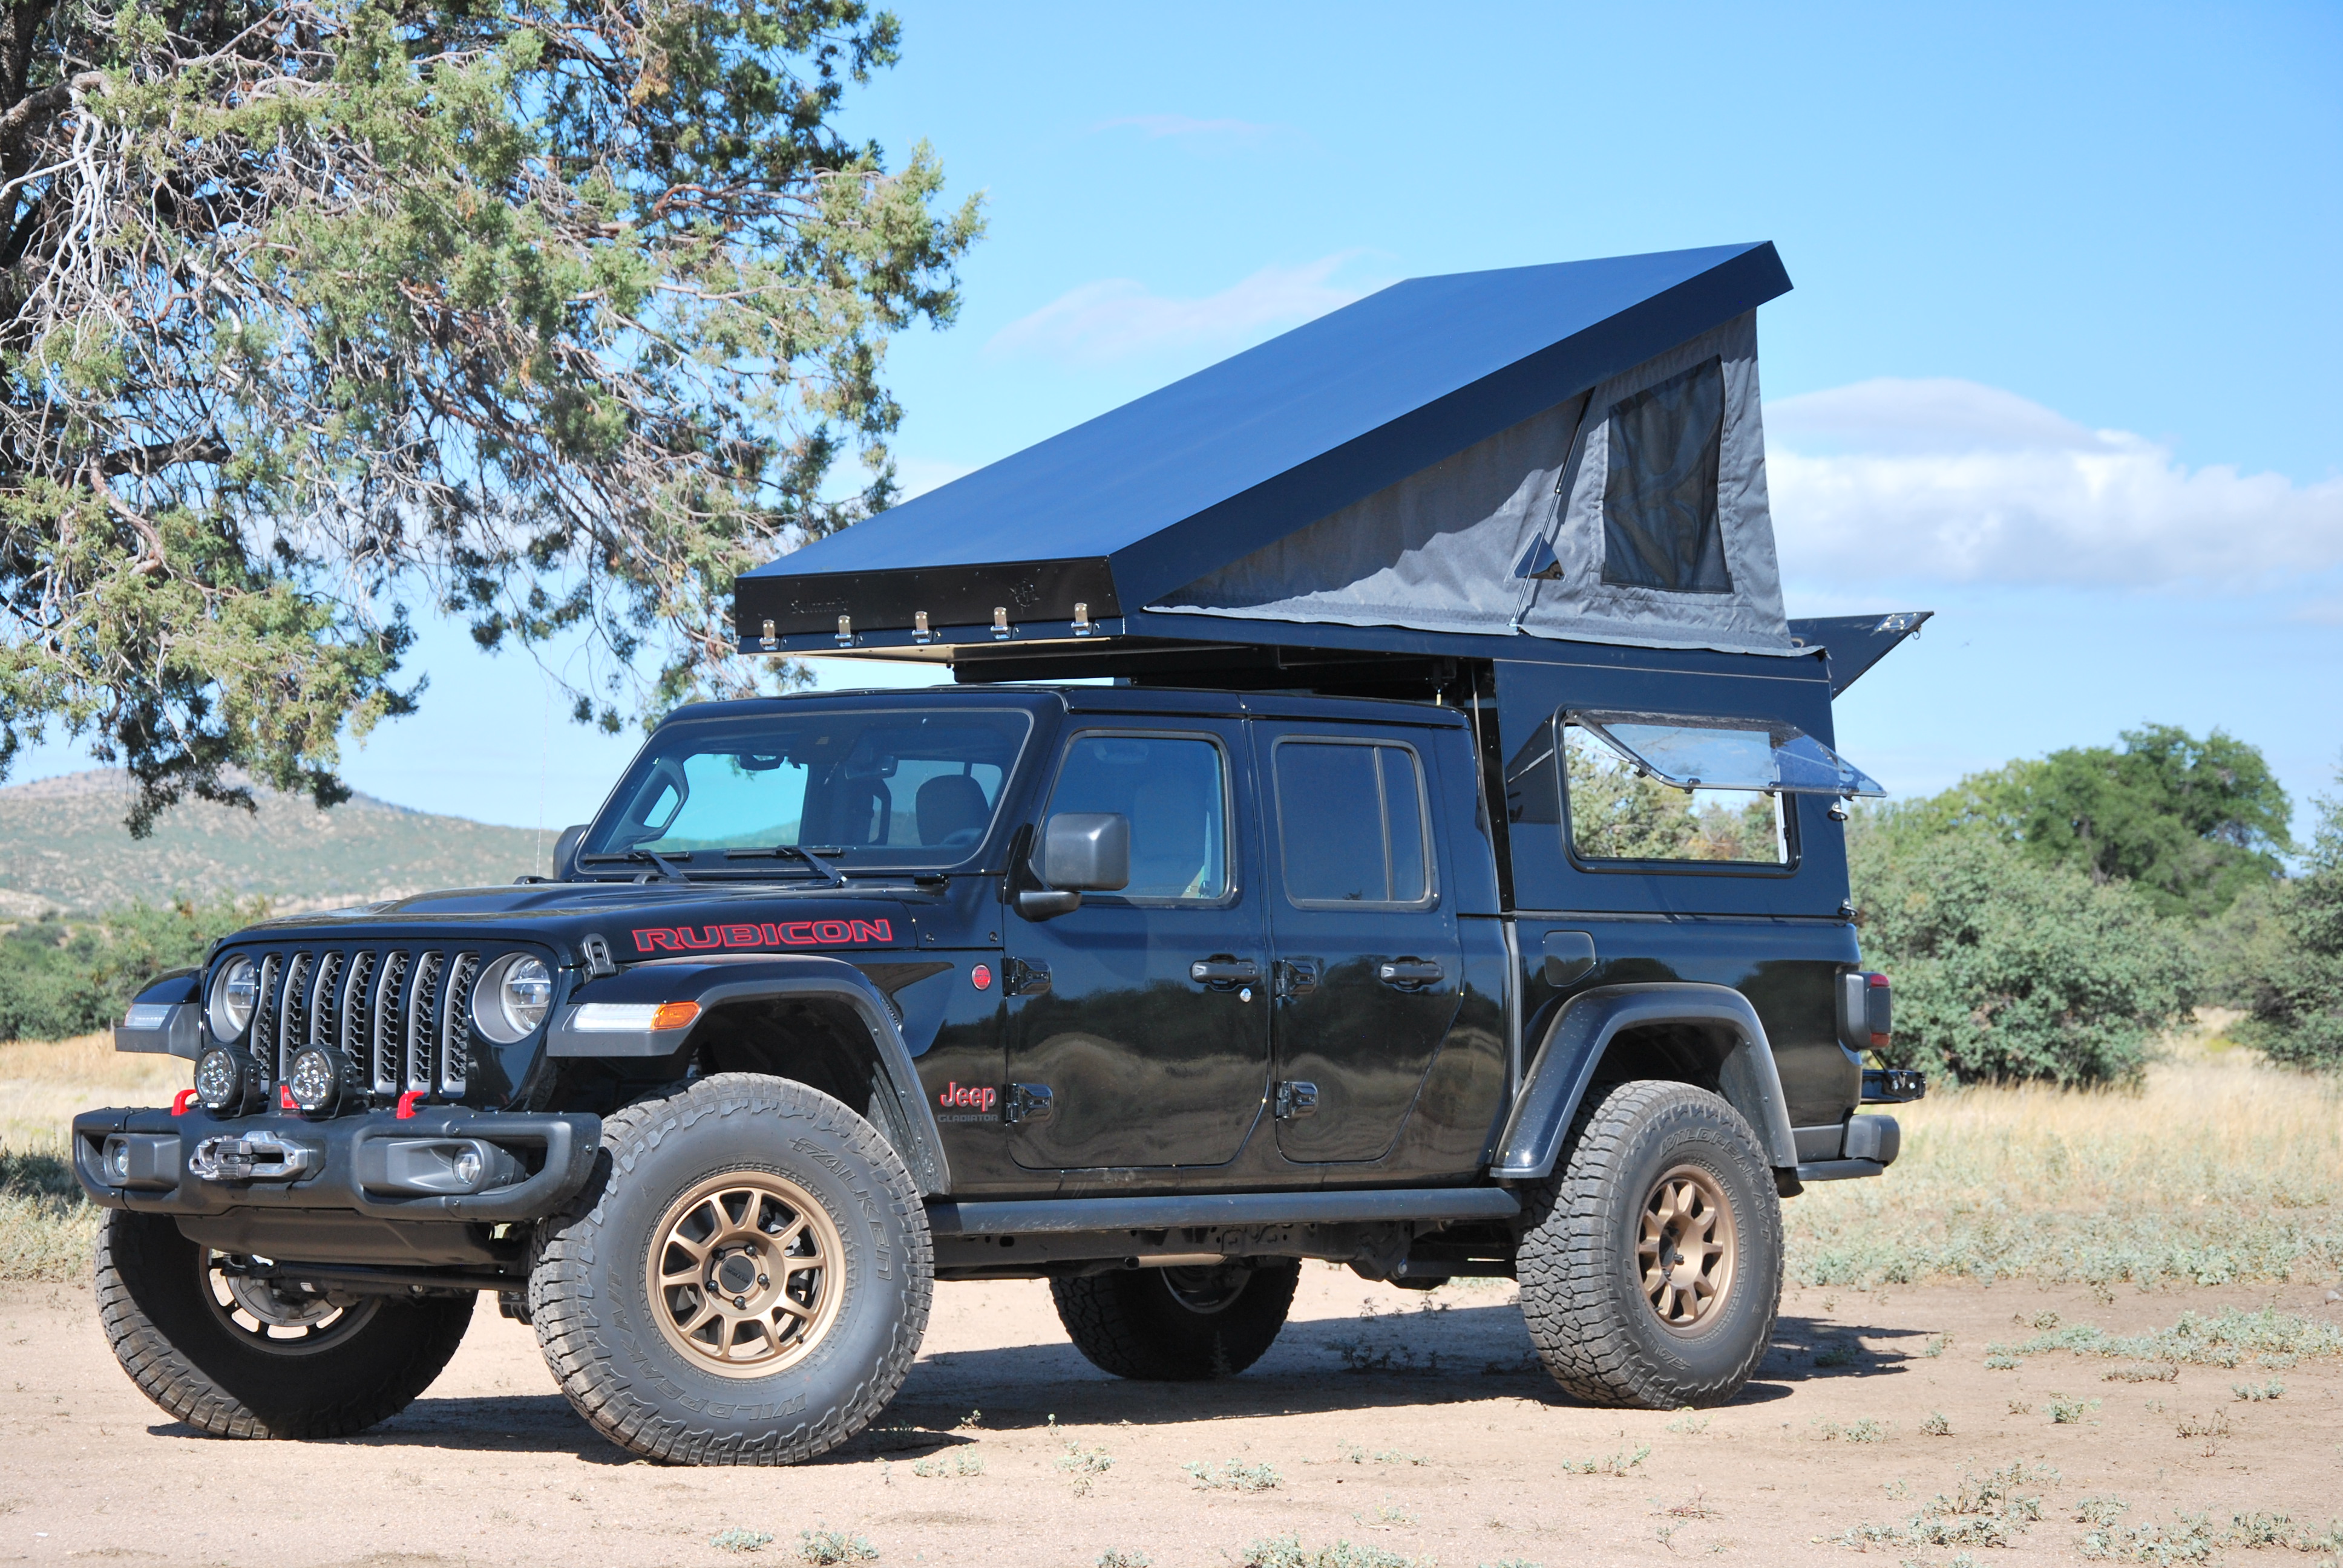 New Summit Camp Topper for Jeep Gladiator by AT Overland provides excellent...